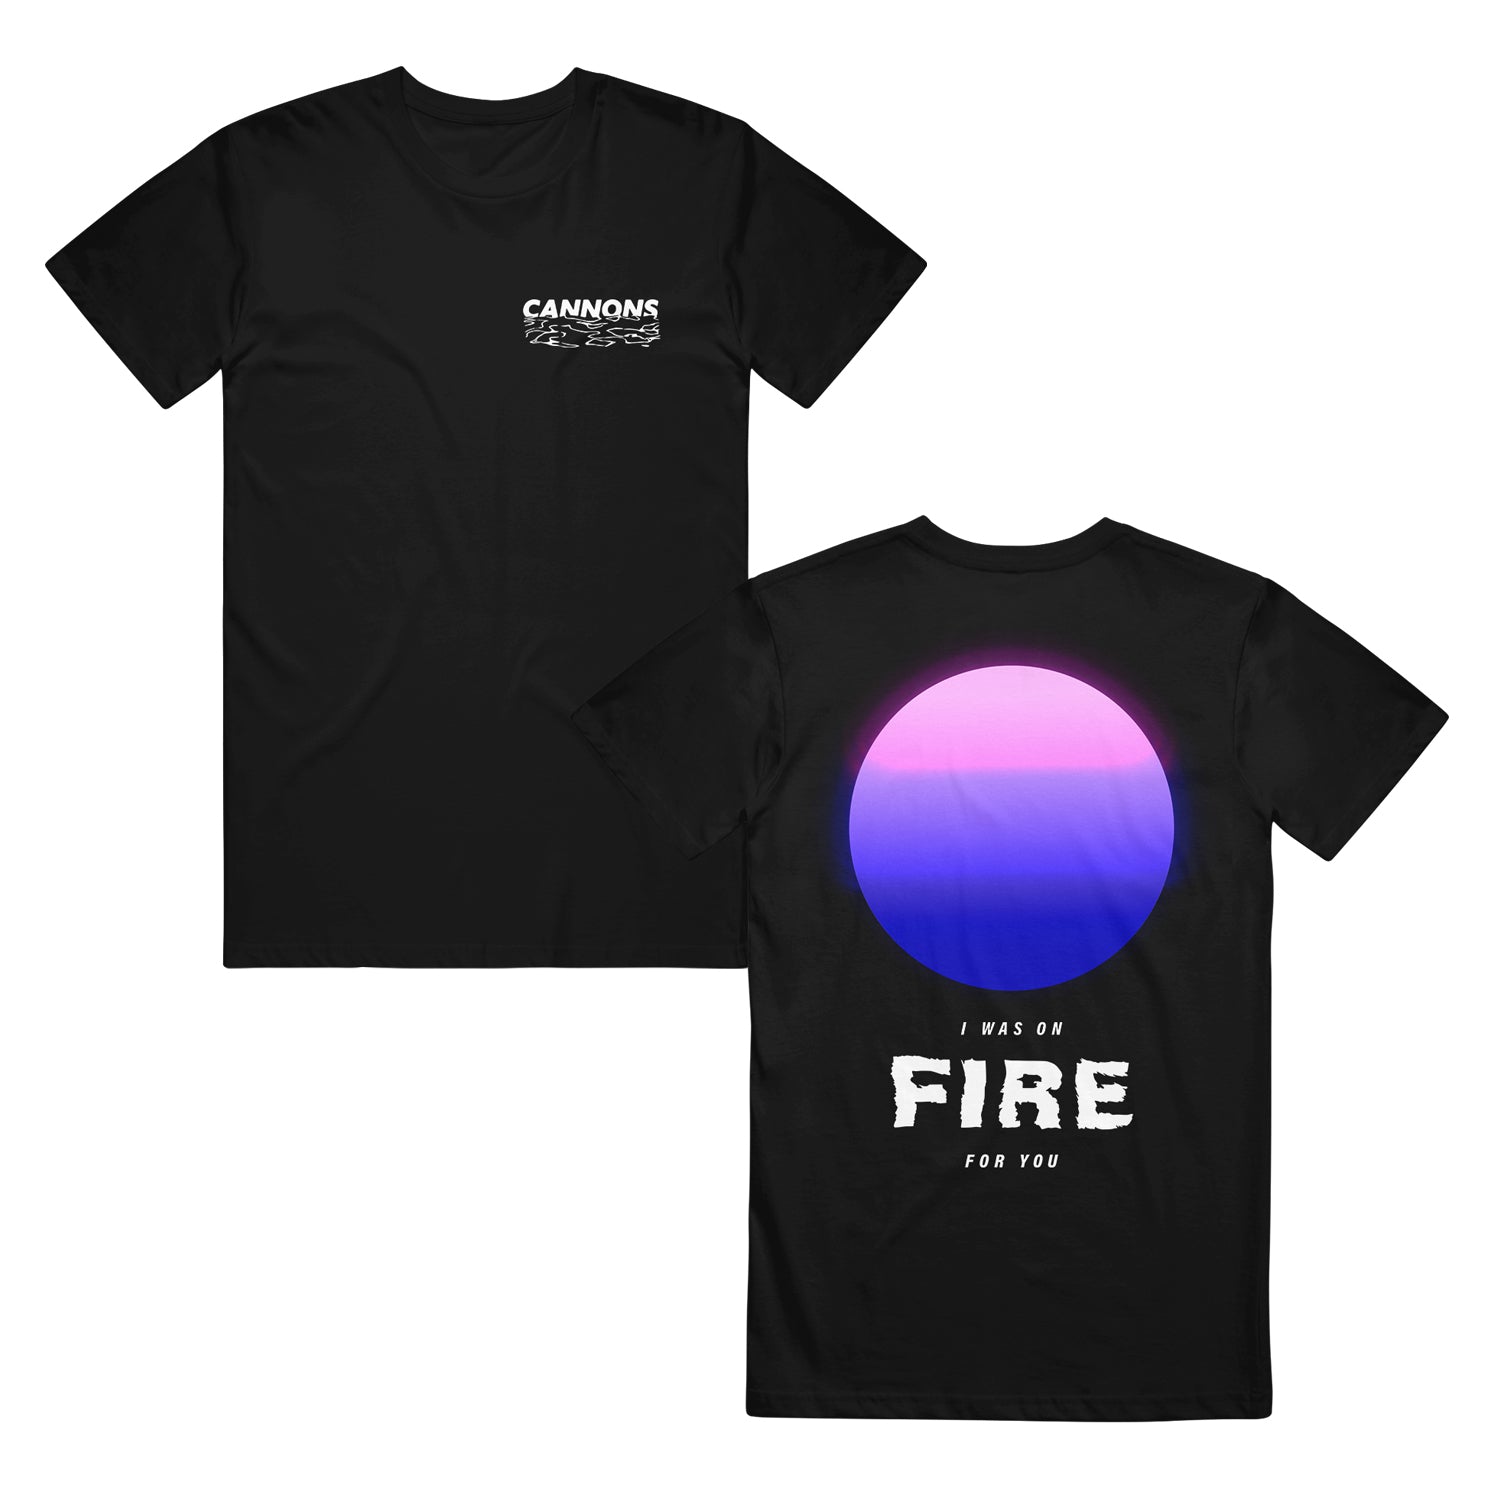 Image of the front and back of a black tshirt on a white background. The left chest says cannons in white and has a squigly design underneath the words. The back of the shirt features a gradiant pink and purple circle, and below it in white says I was on fire for you. The word fire is larger and bolder than the rest of the words.